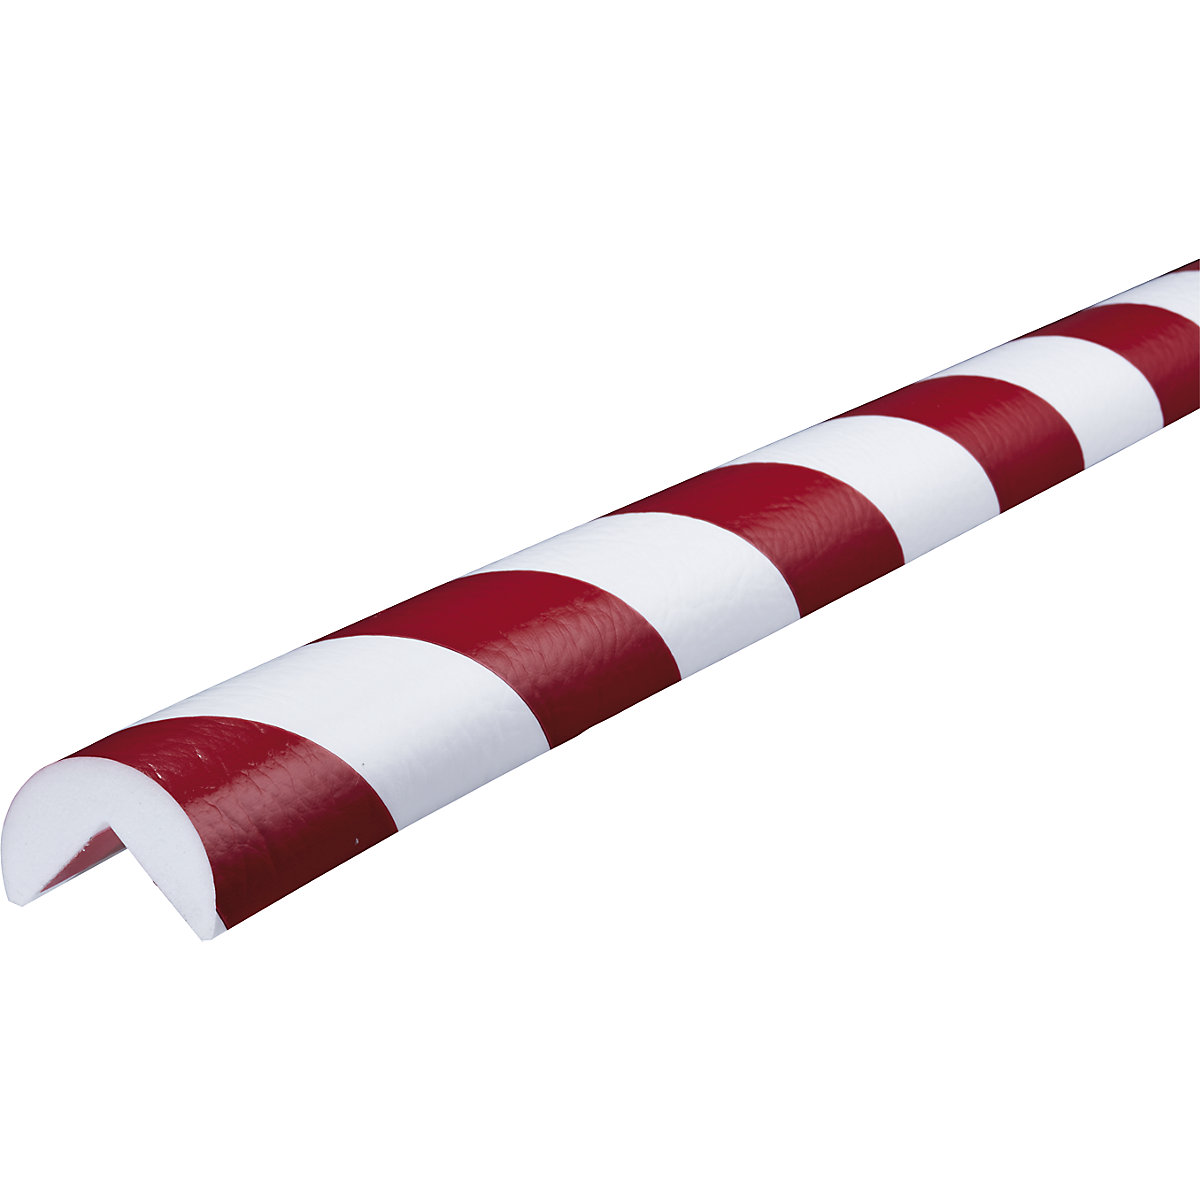 Knuffi® corner protection – SHG, type A, 1 x 5 m roll, red / white-18